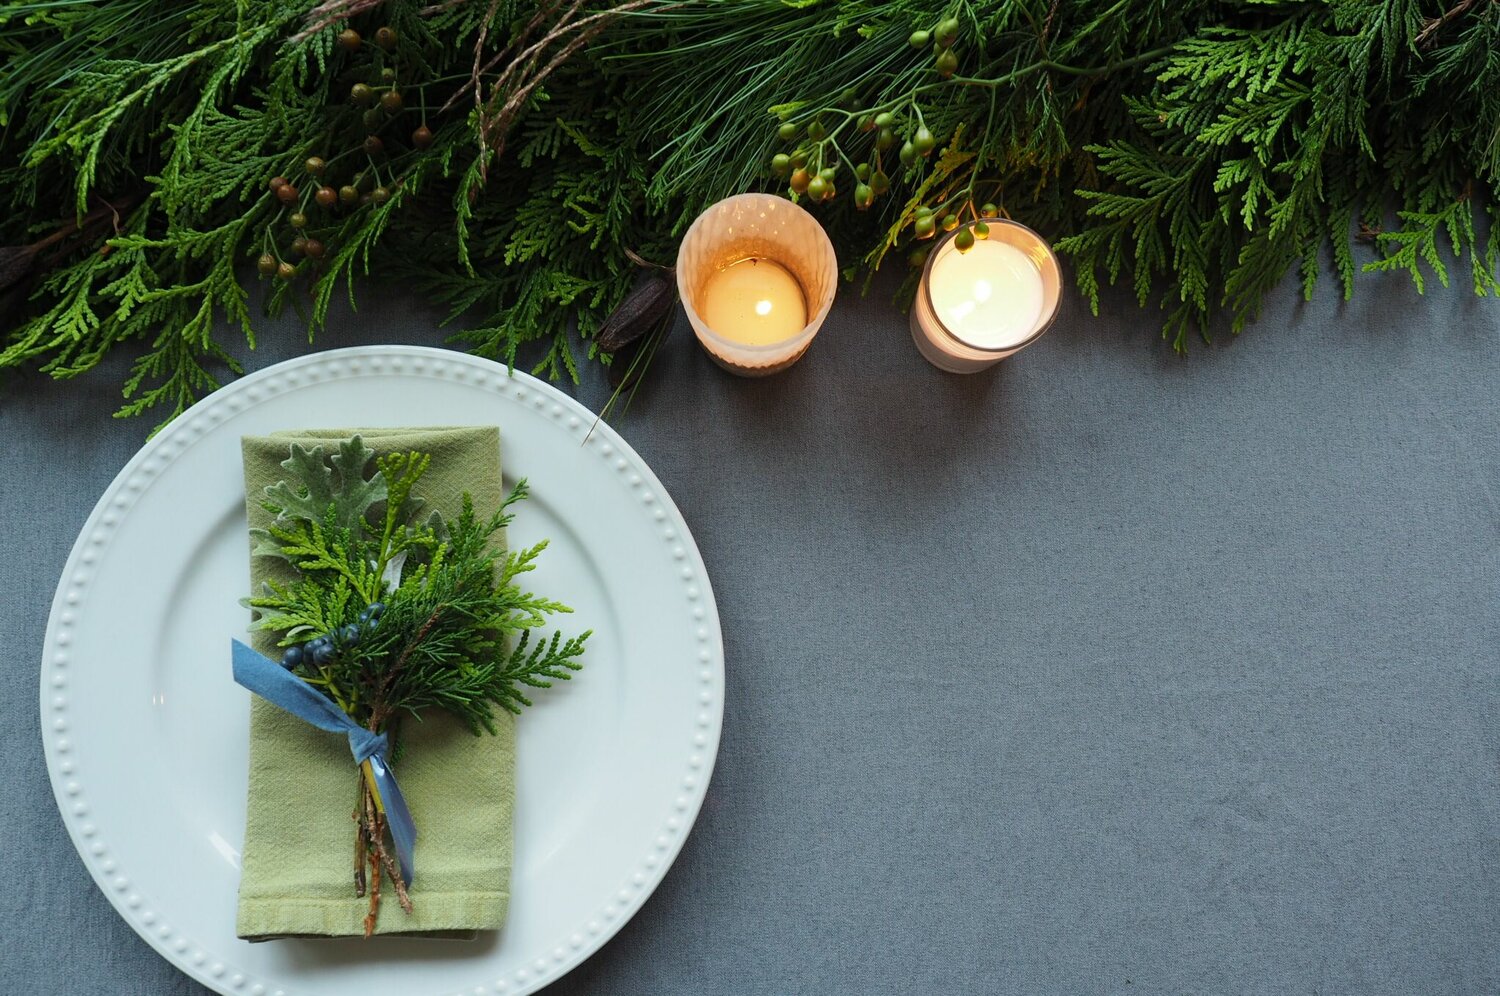 A few simple clippings from the yard or nearby woods can be transformed into striking decorations for a holiday table.